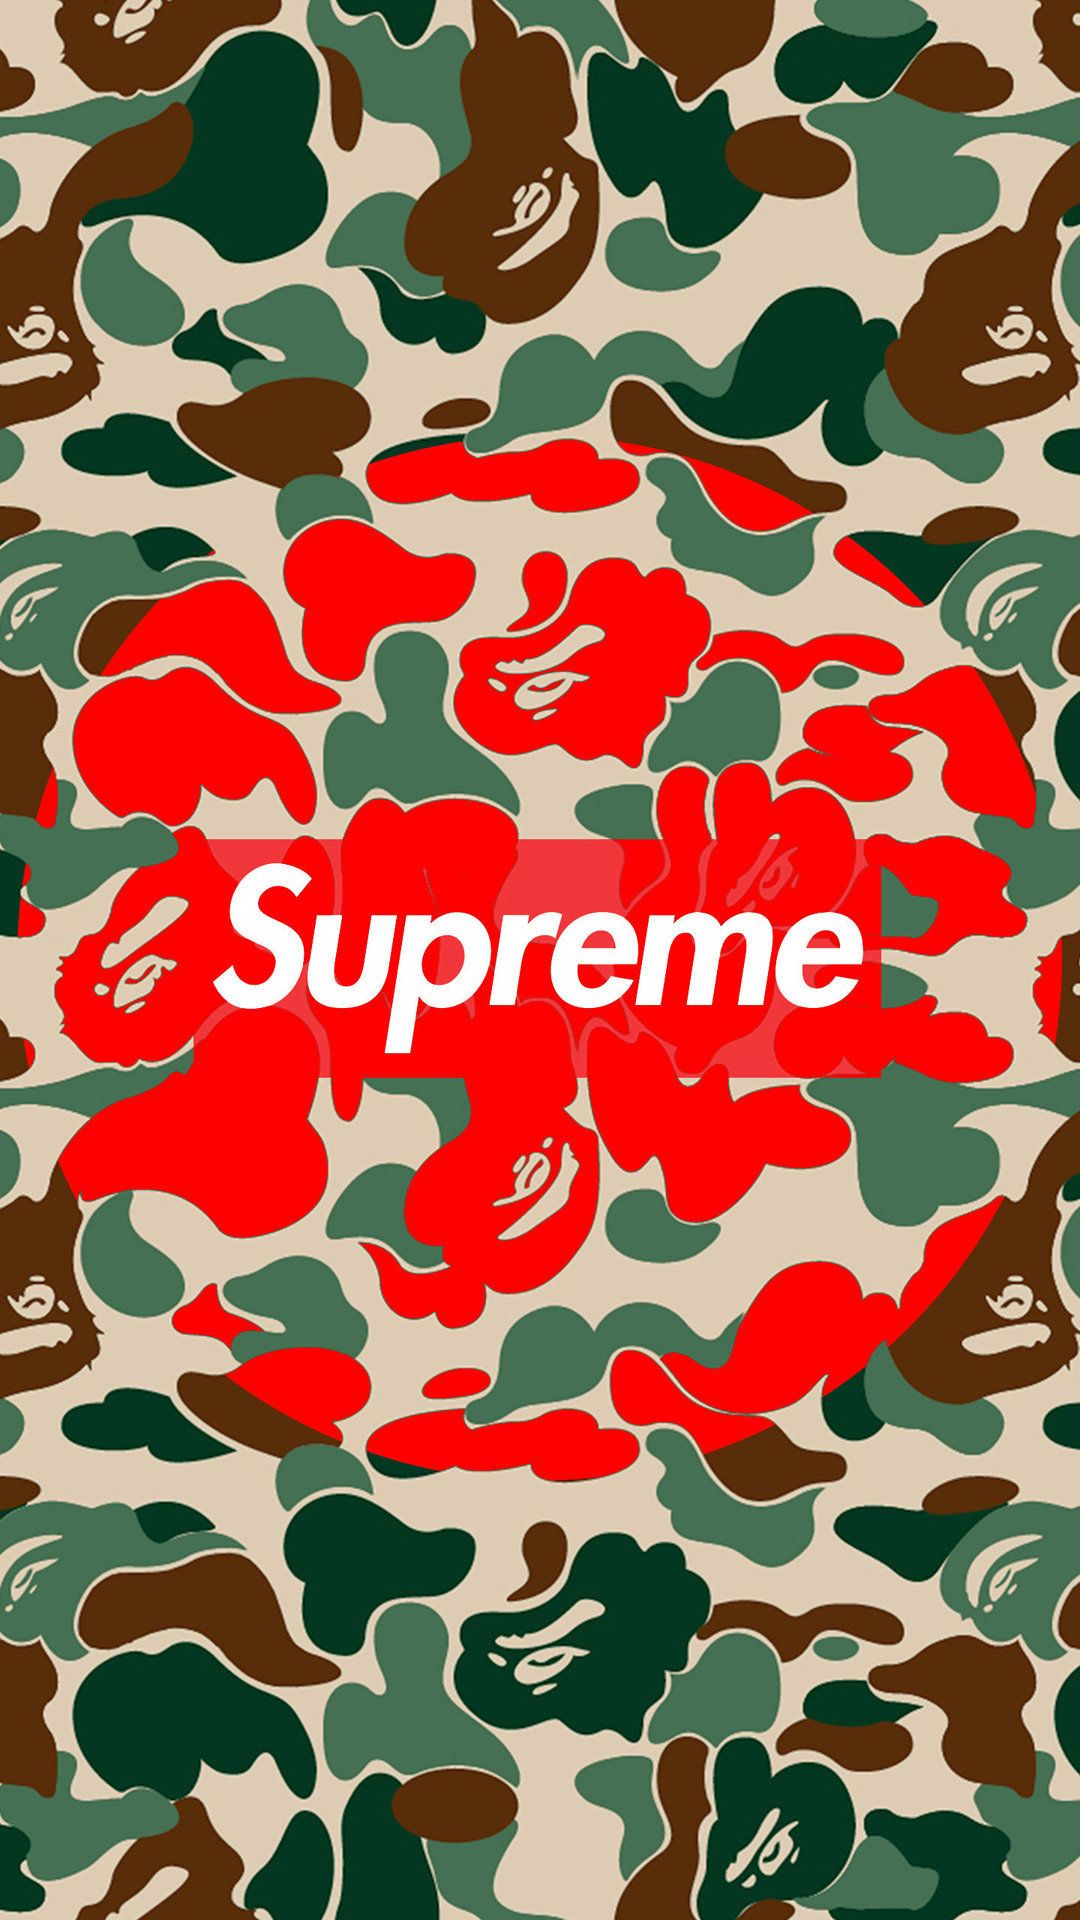 supreme camo wallpaper,military camouflage,pattern,green,camouflage,design